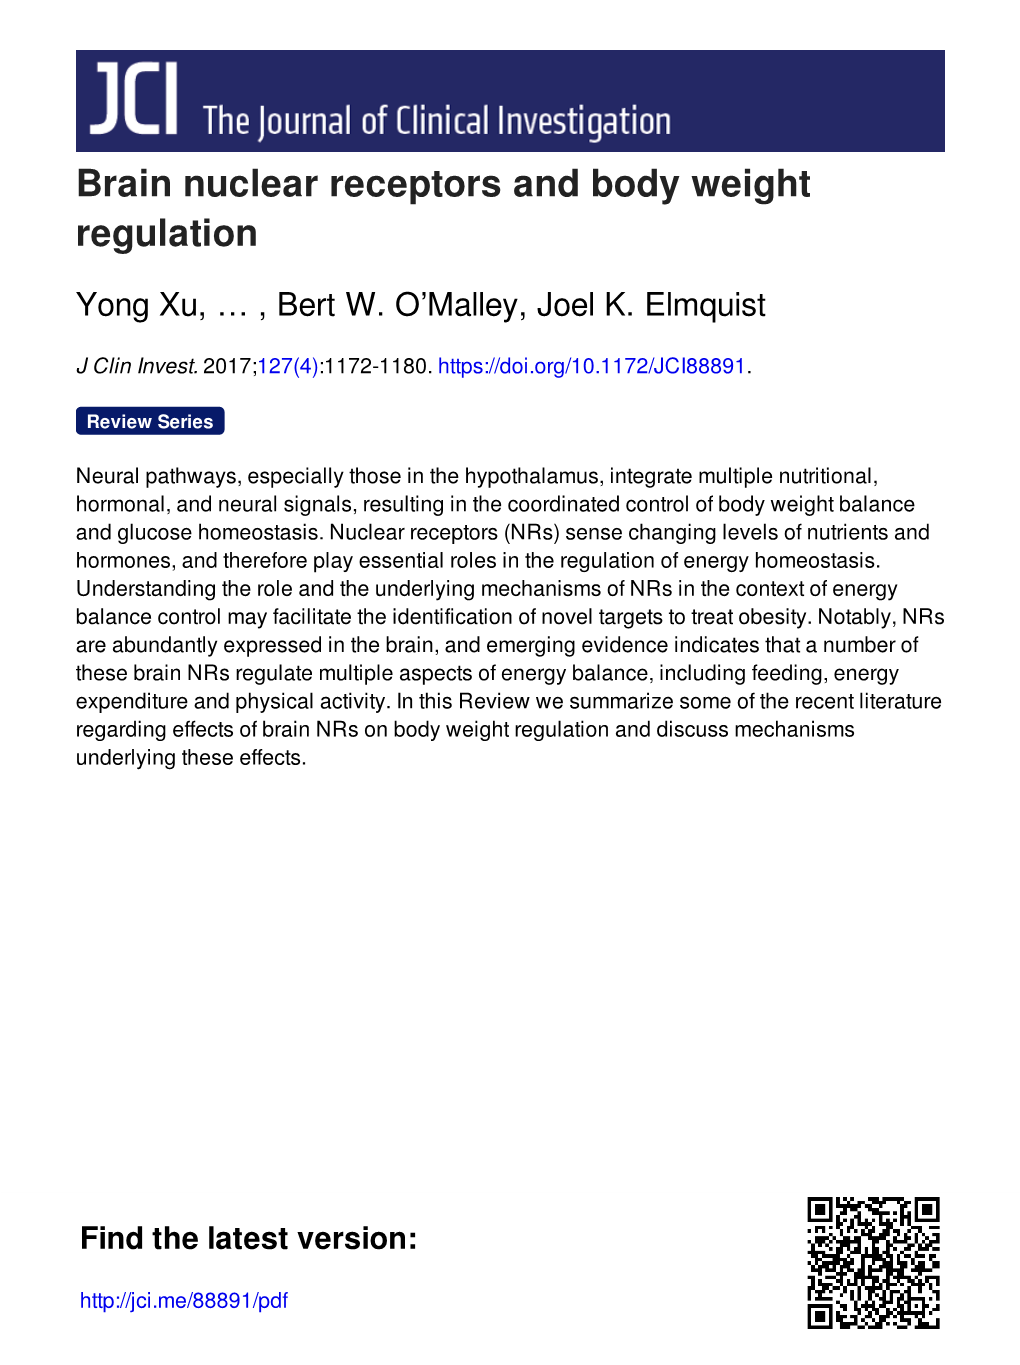 Brain Nuclear Receptors and Body Weight Regulation